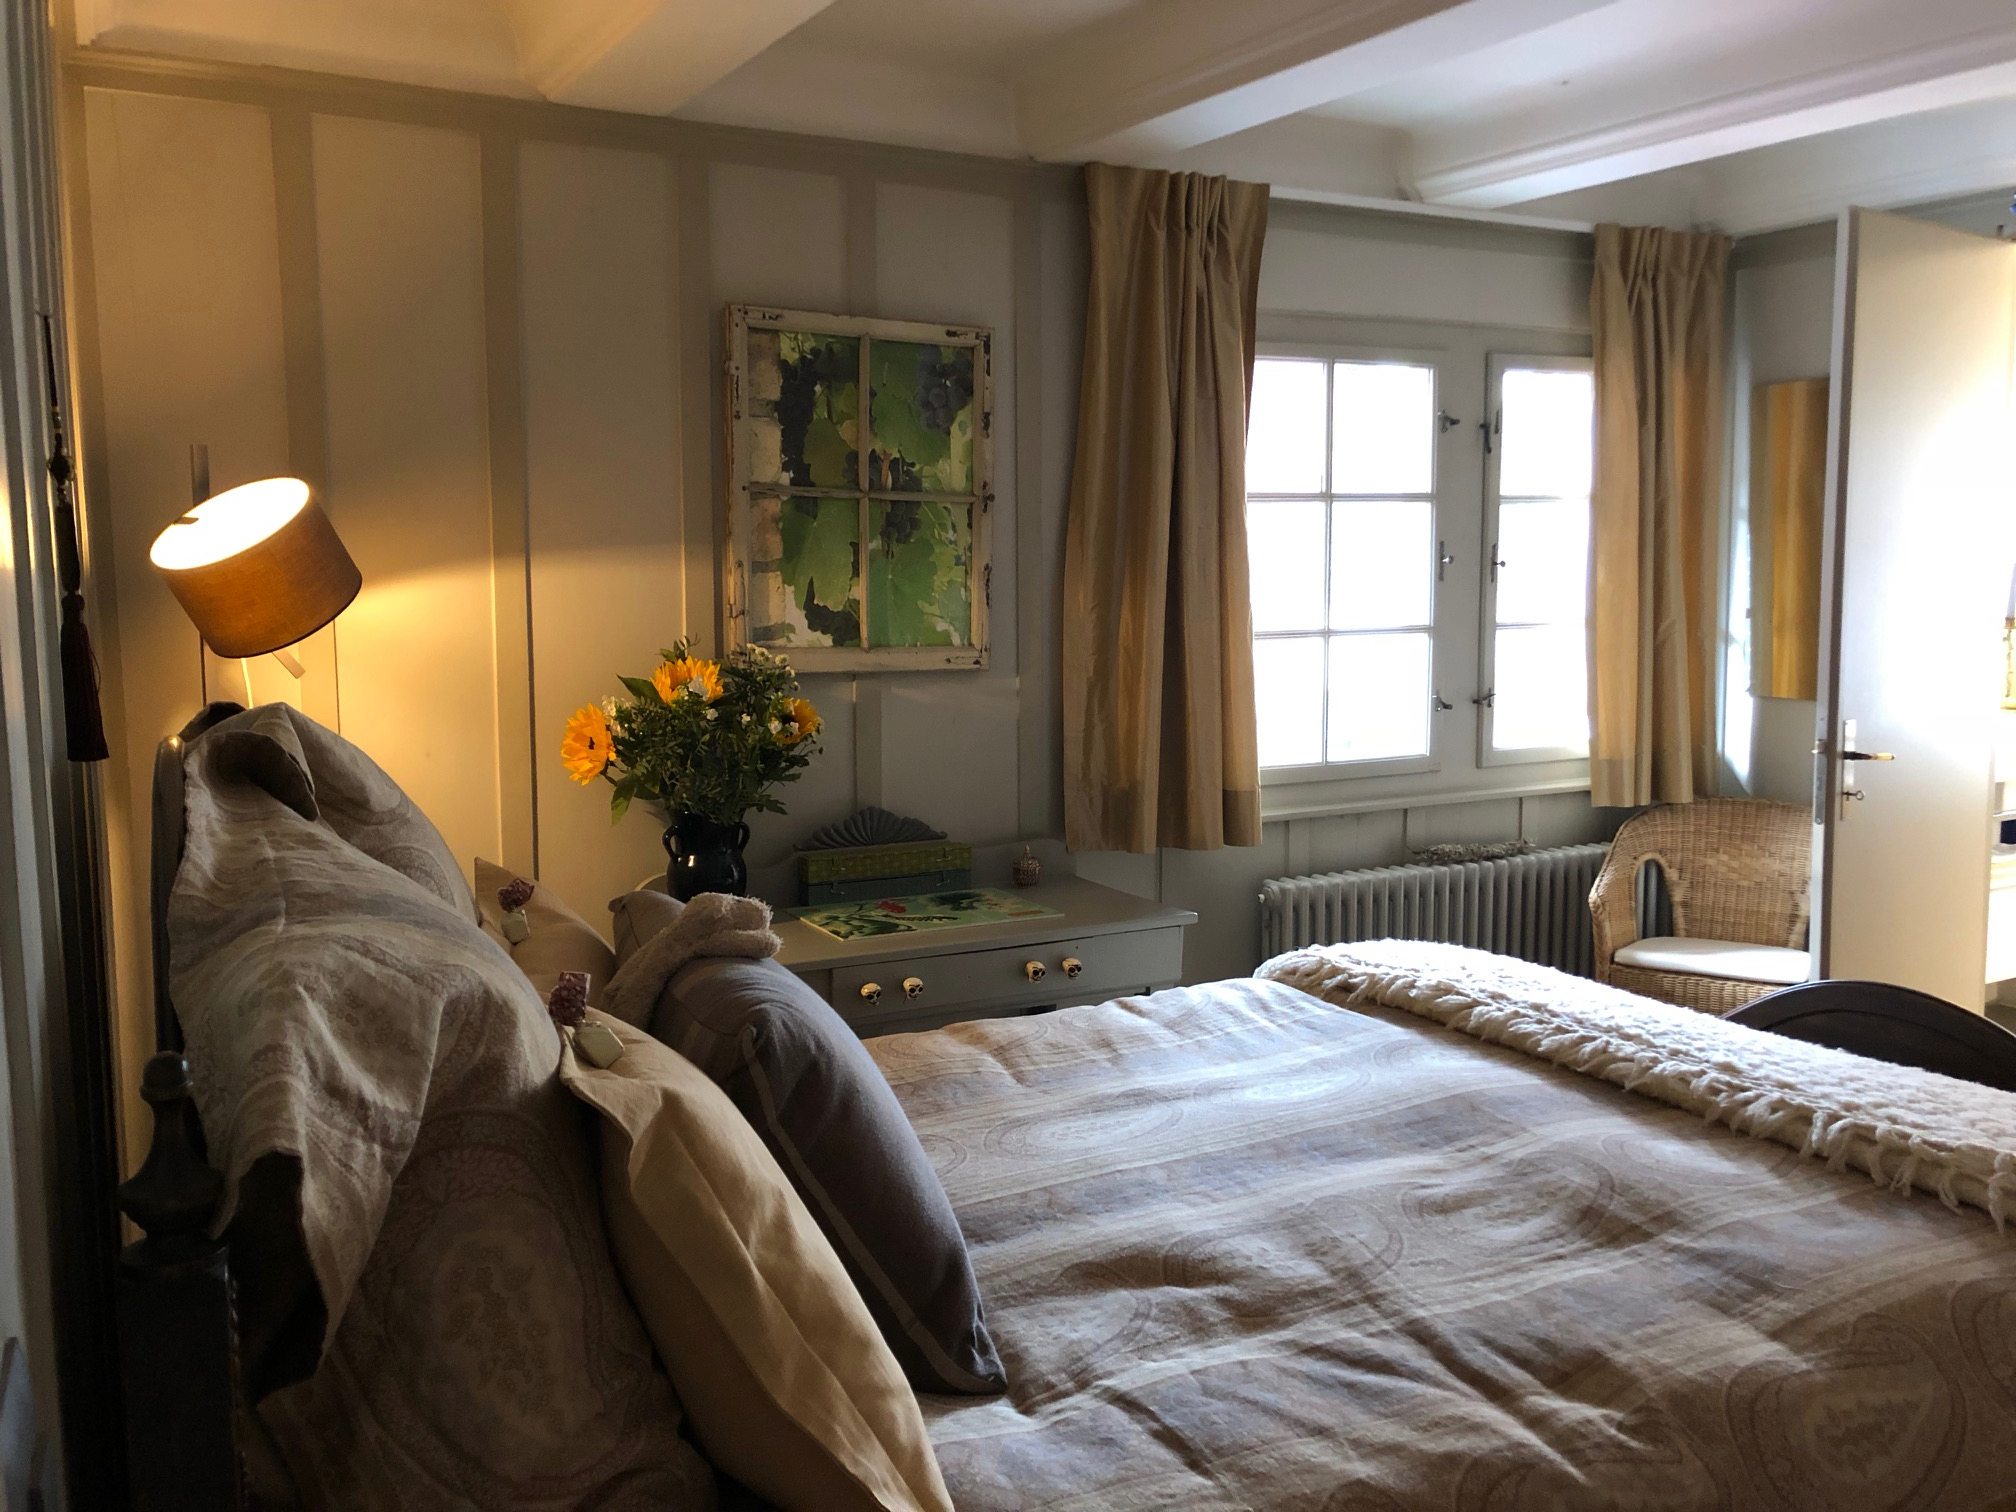 Zurich old town, exclusive - Bed and breakfasts for Rent in Zürich